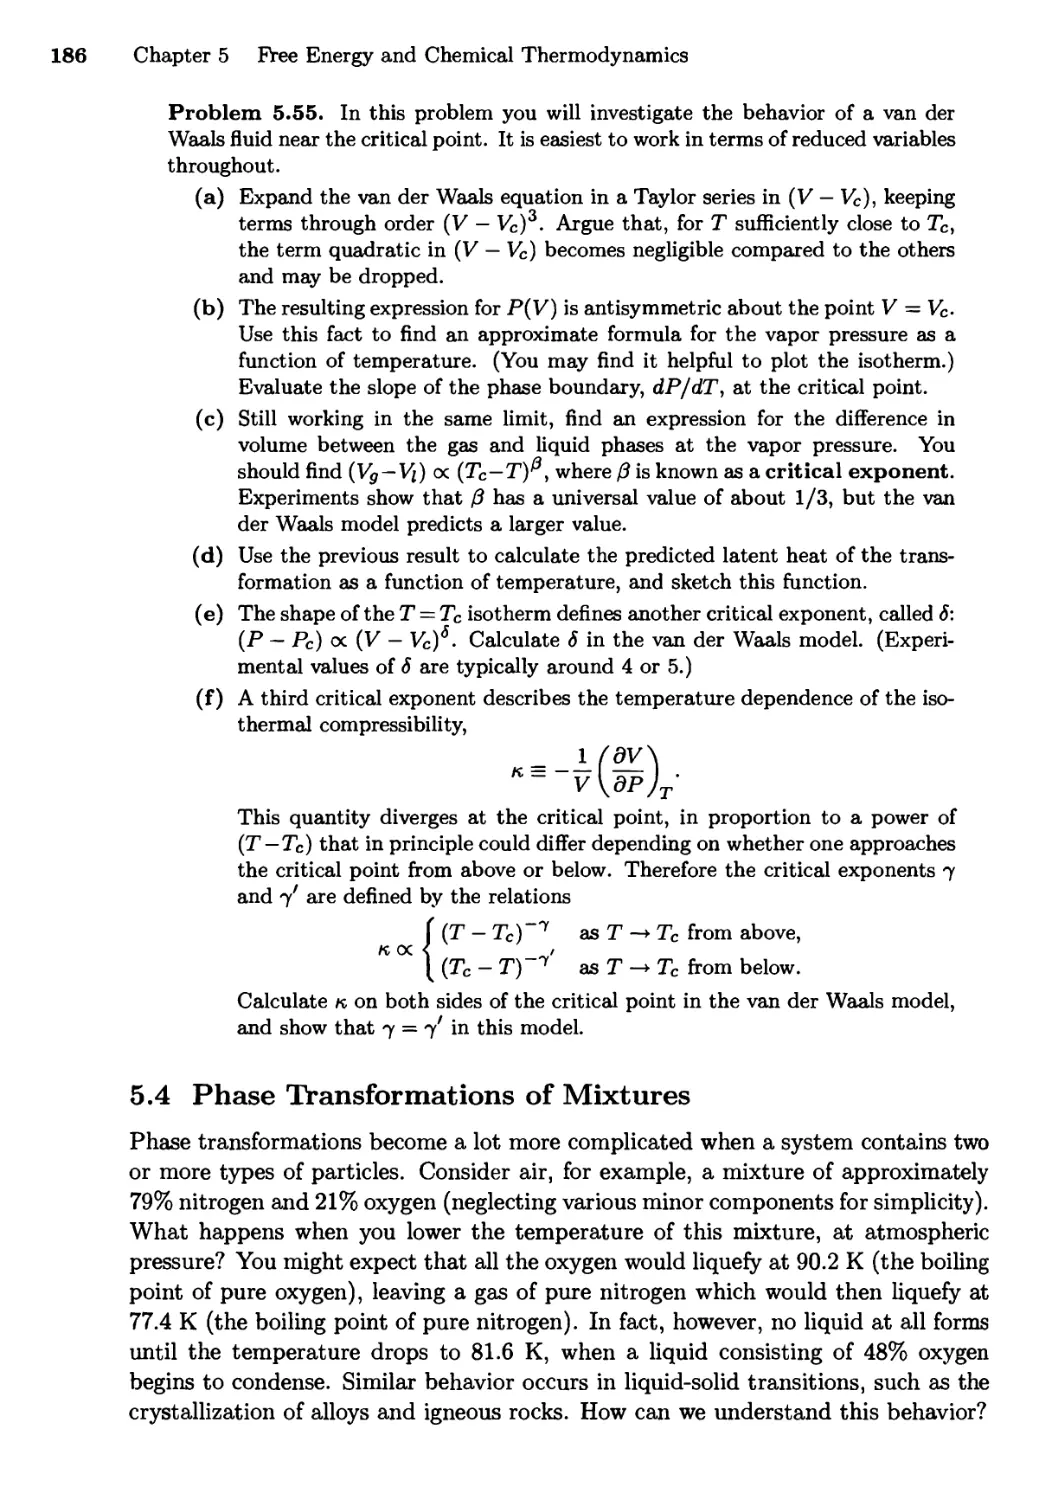 5.4 Phase Transformations of Mixtures